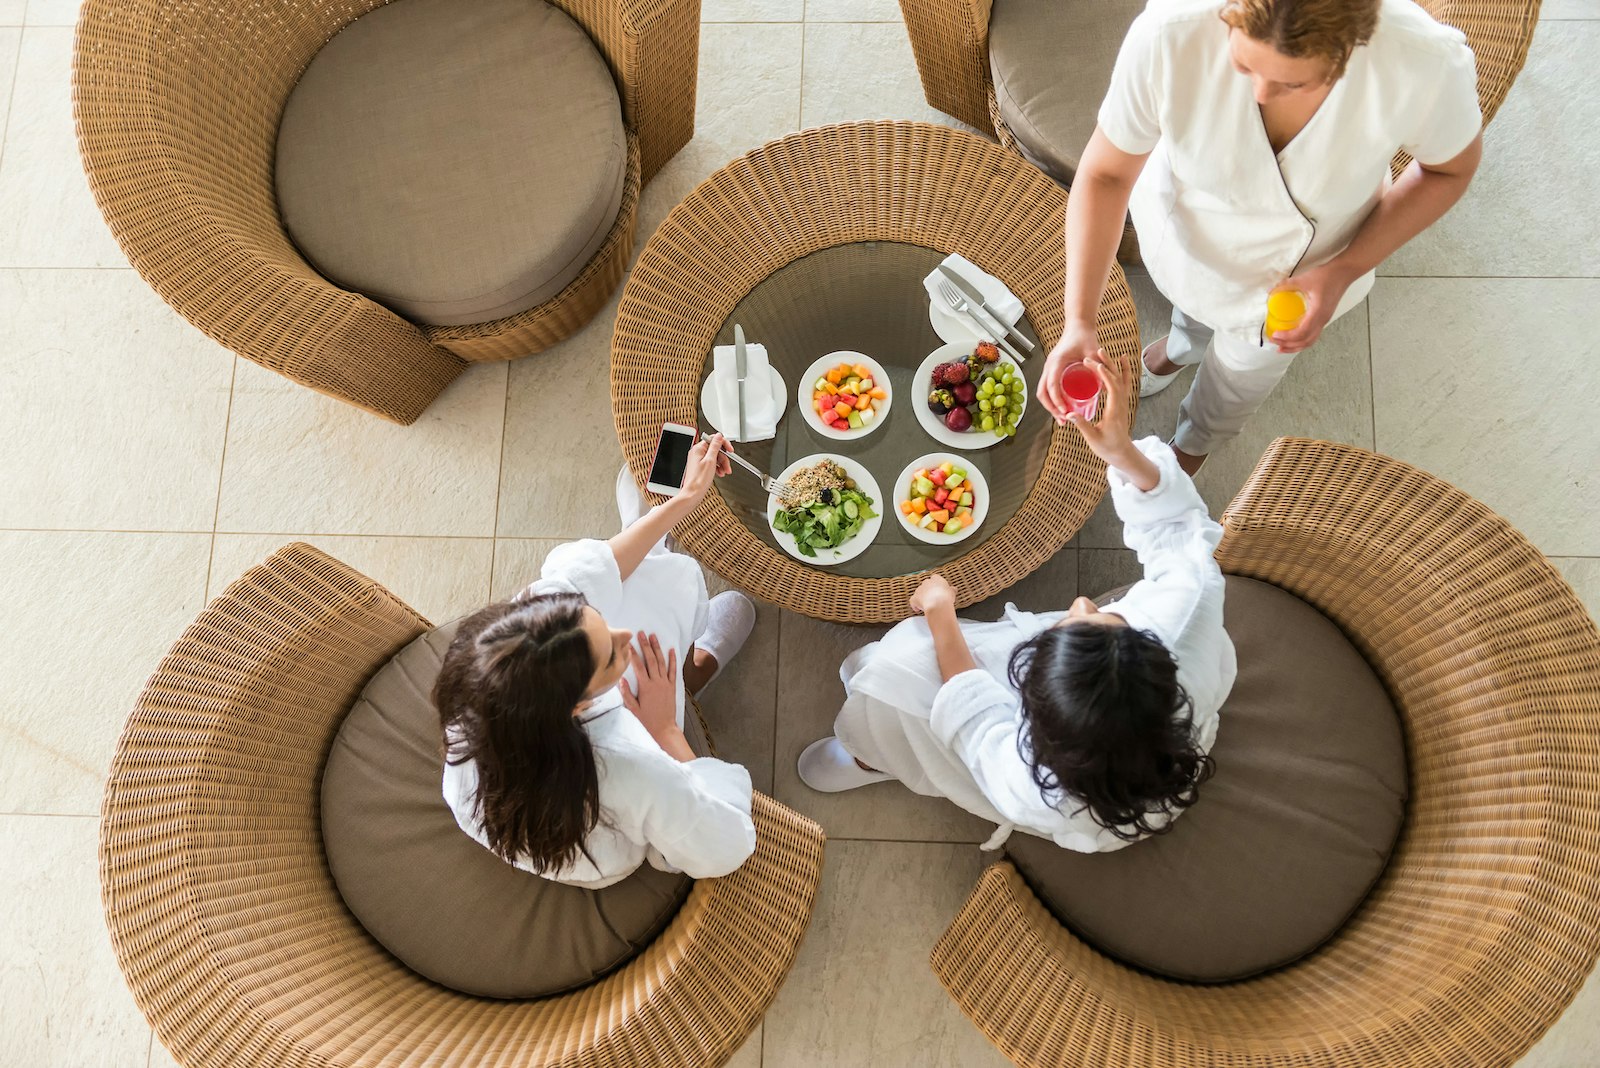 Two girlfriends in white bathrobes and slippers eating a healthy spa lunch at a resort hotel while a therapist serves them fresh orange and watermelon juice. Aerial, overhead view.